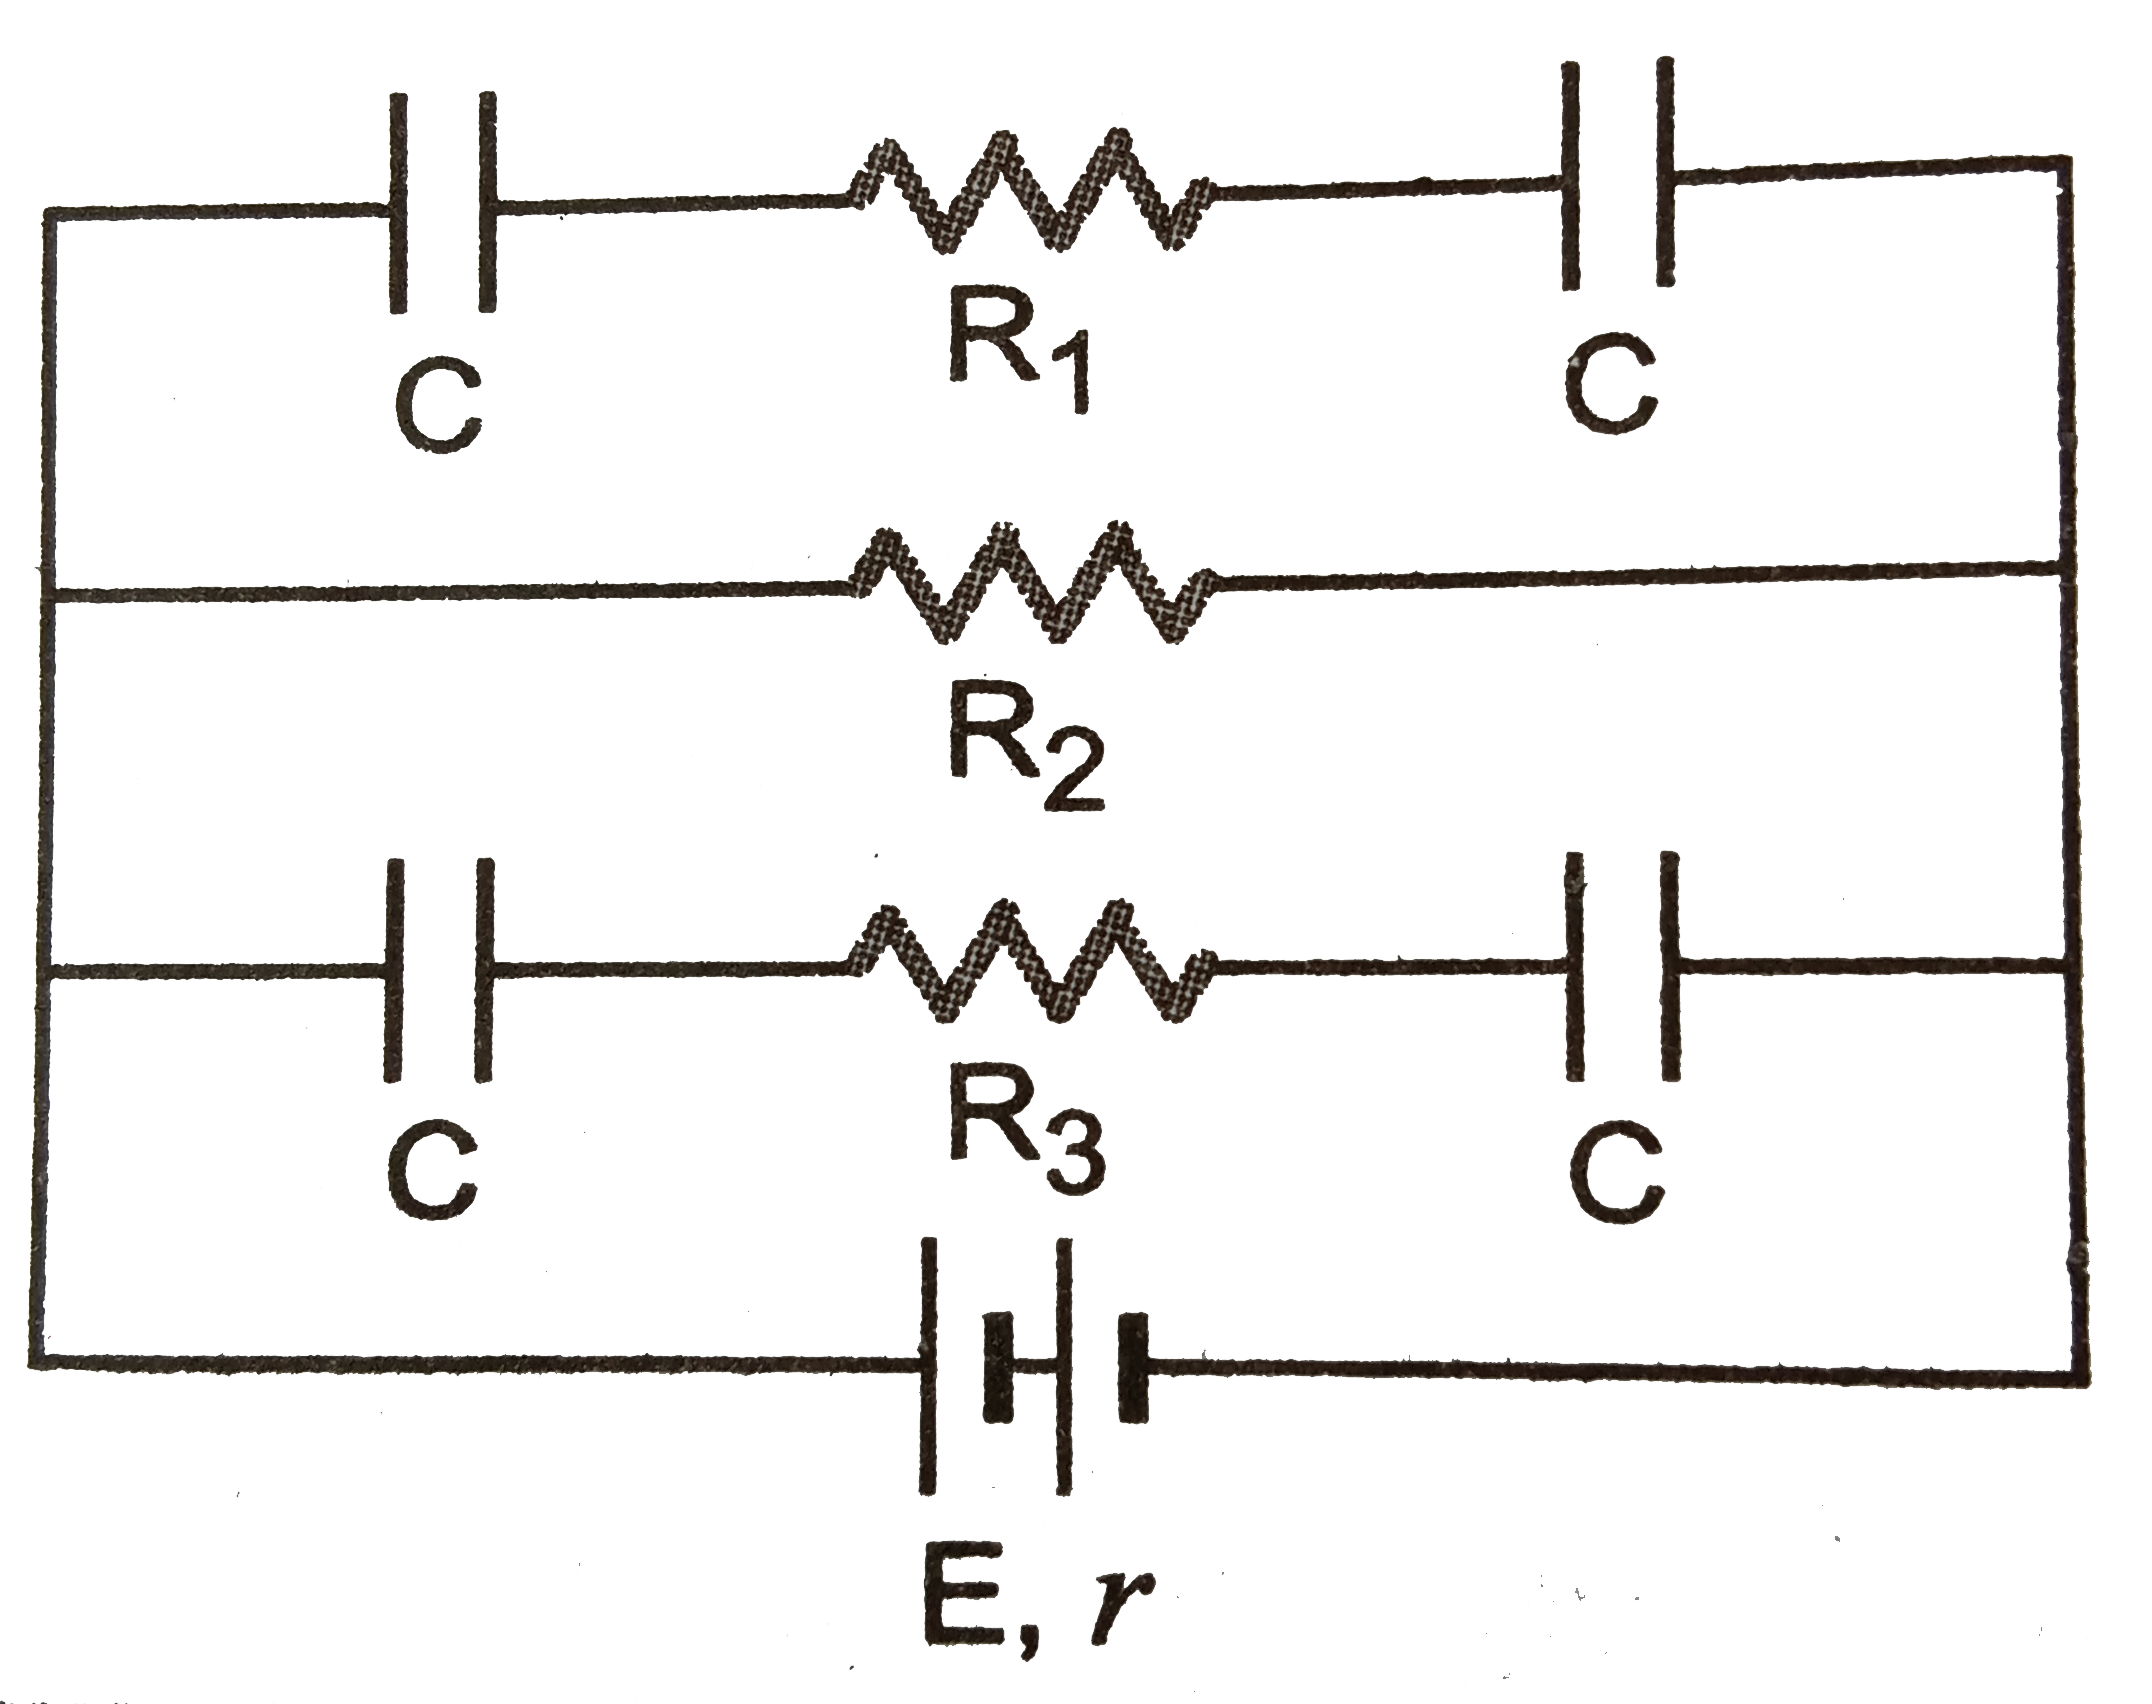 In Fig, E =5  volt , r = 1 Omega, R(2) = 4 Omega, R(1) = R(3) = 1 Omega and C = 3 muF. Then the numbercal value of the charge on each plate of the capacitor is